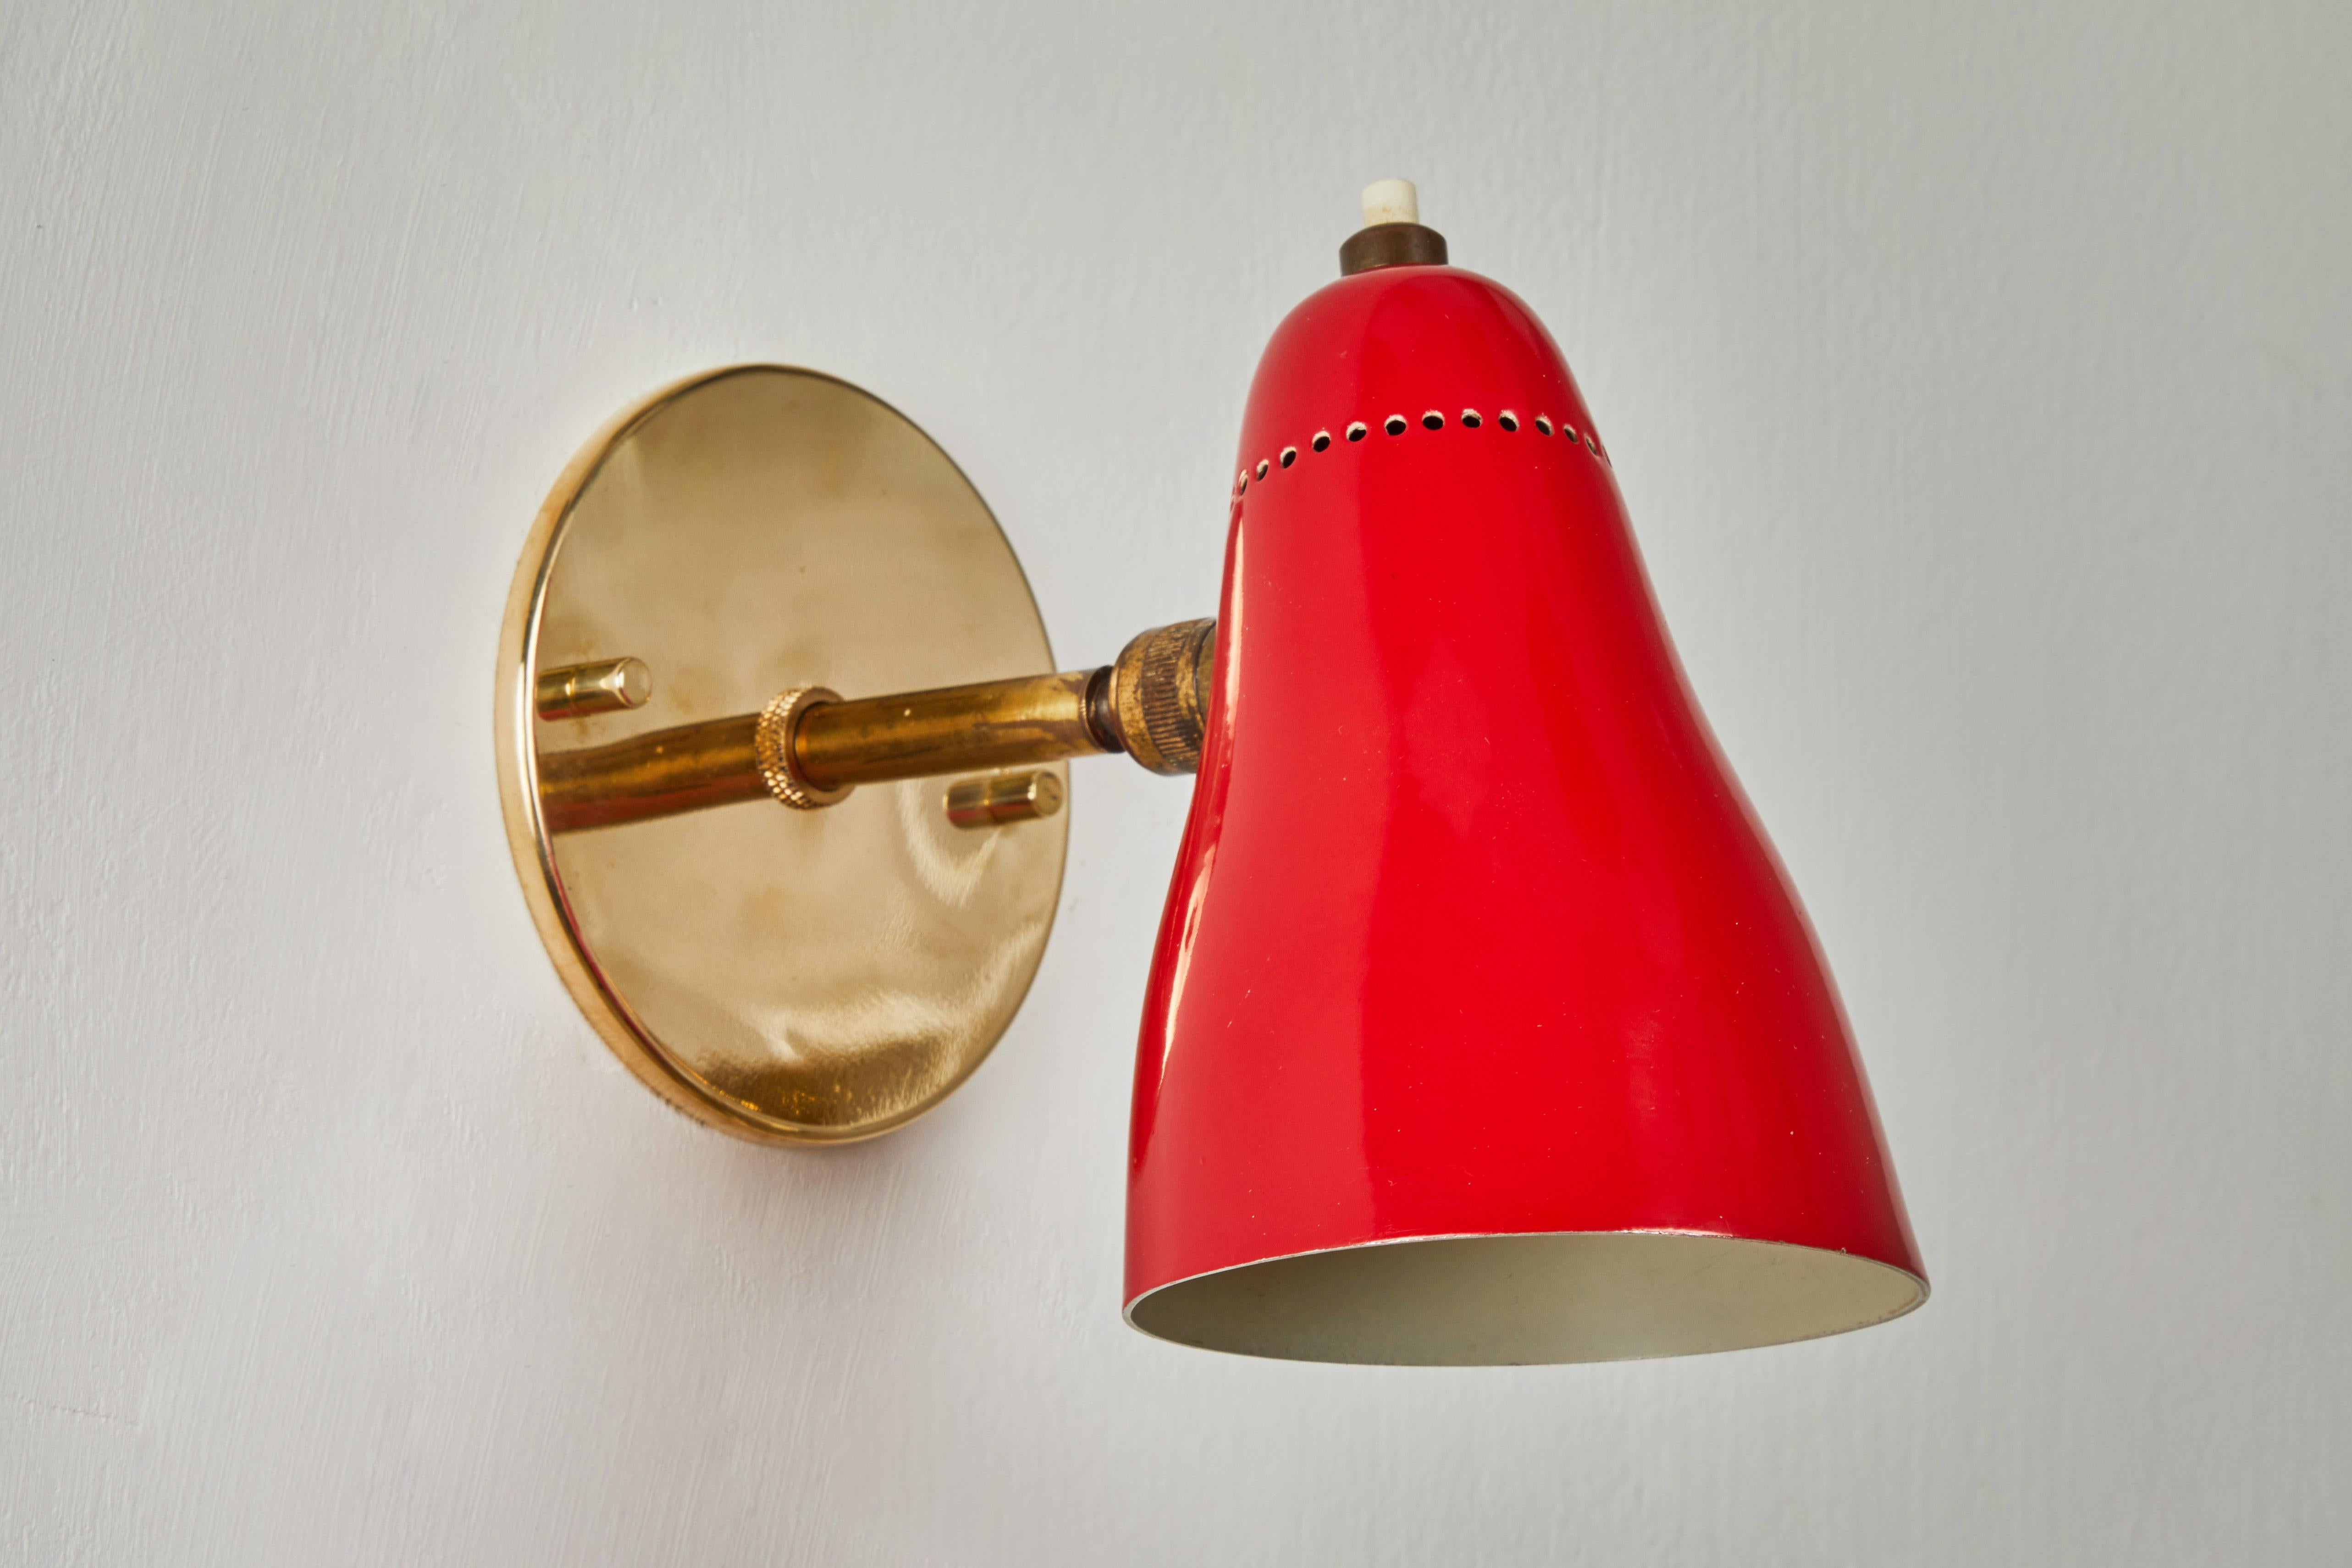 Pair of Red 1950s Giuseppe Ostuni articulating sconces for O-Luce. Executed in brass and red painted aluminum with perforated shade. Sconces pivot up/down and left/right on two separate ball joints. Original on/off switch on top of lamp. Wired for